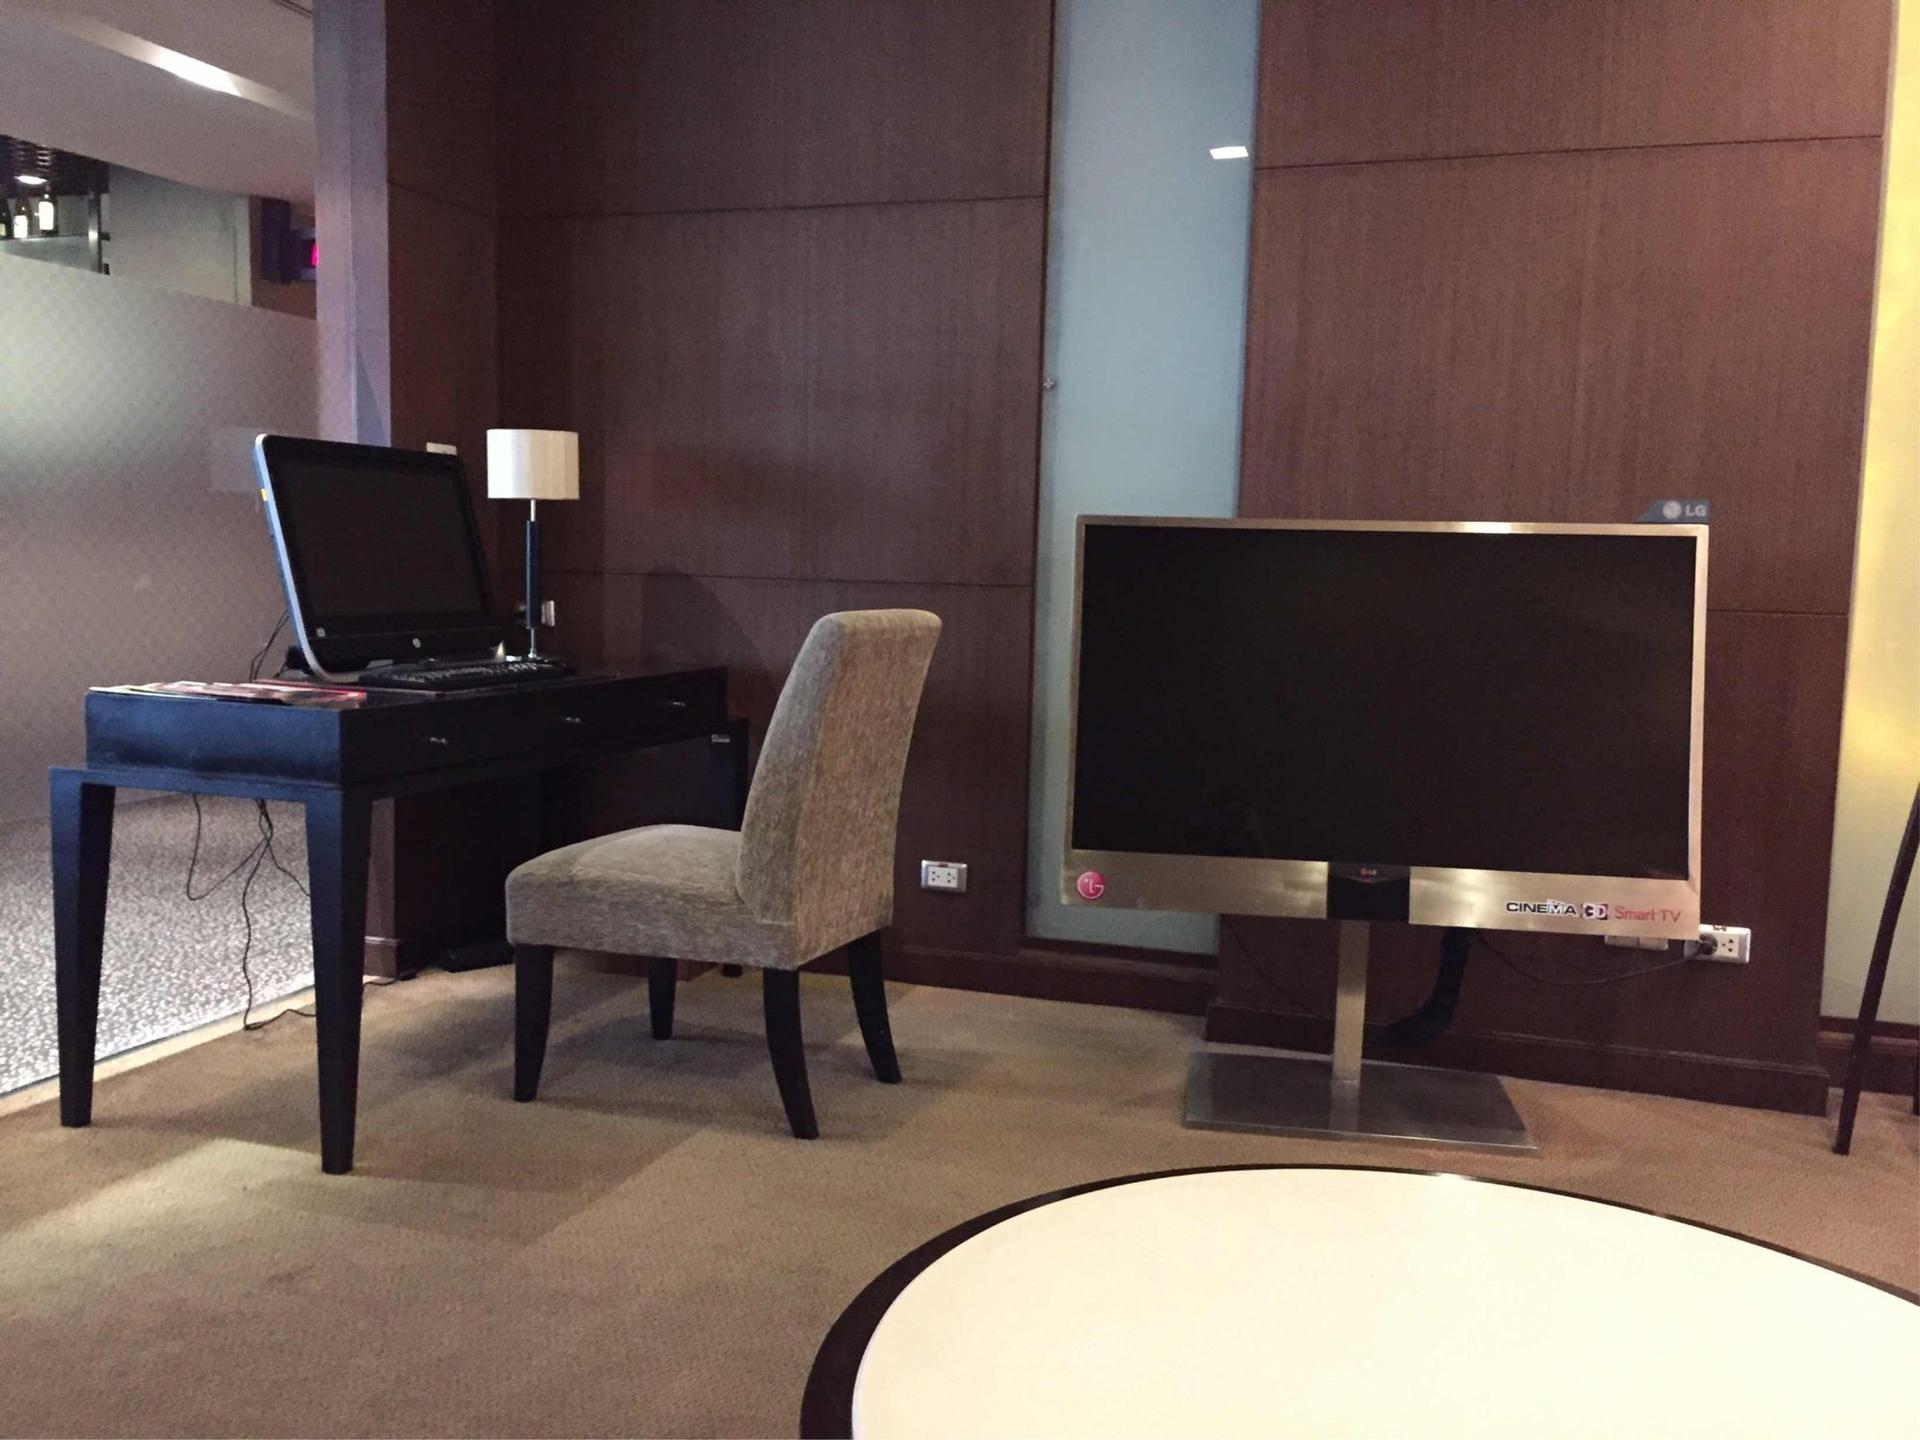 Thai Airways Royal First Class Lounge image 40 of 44